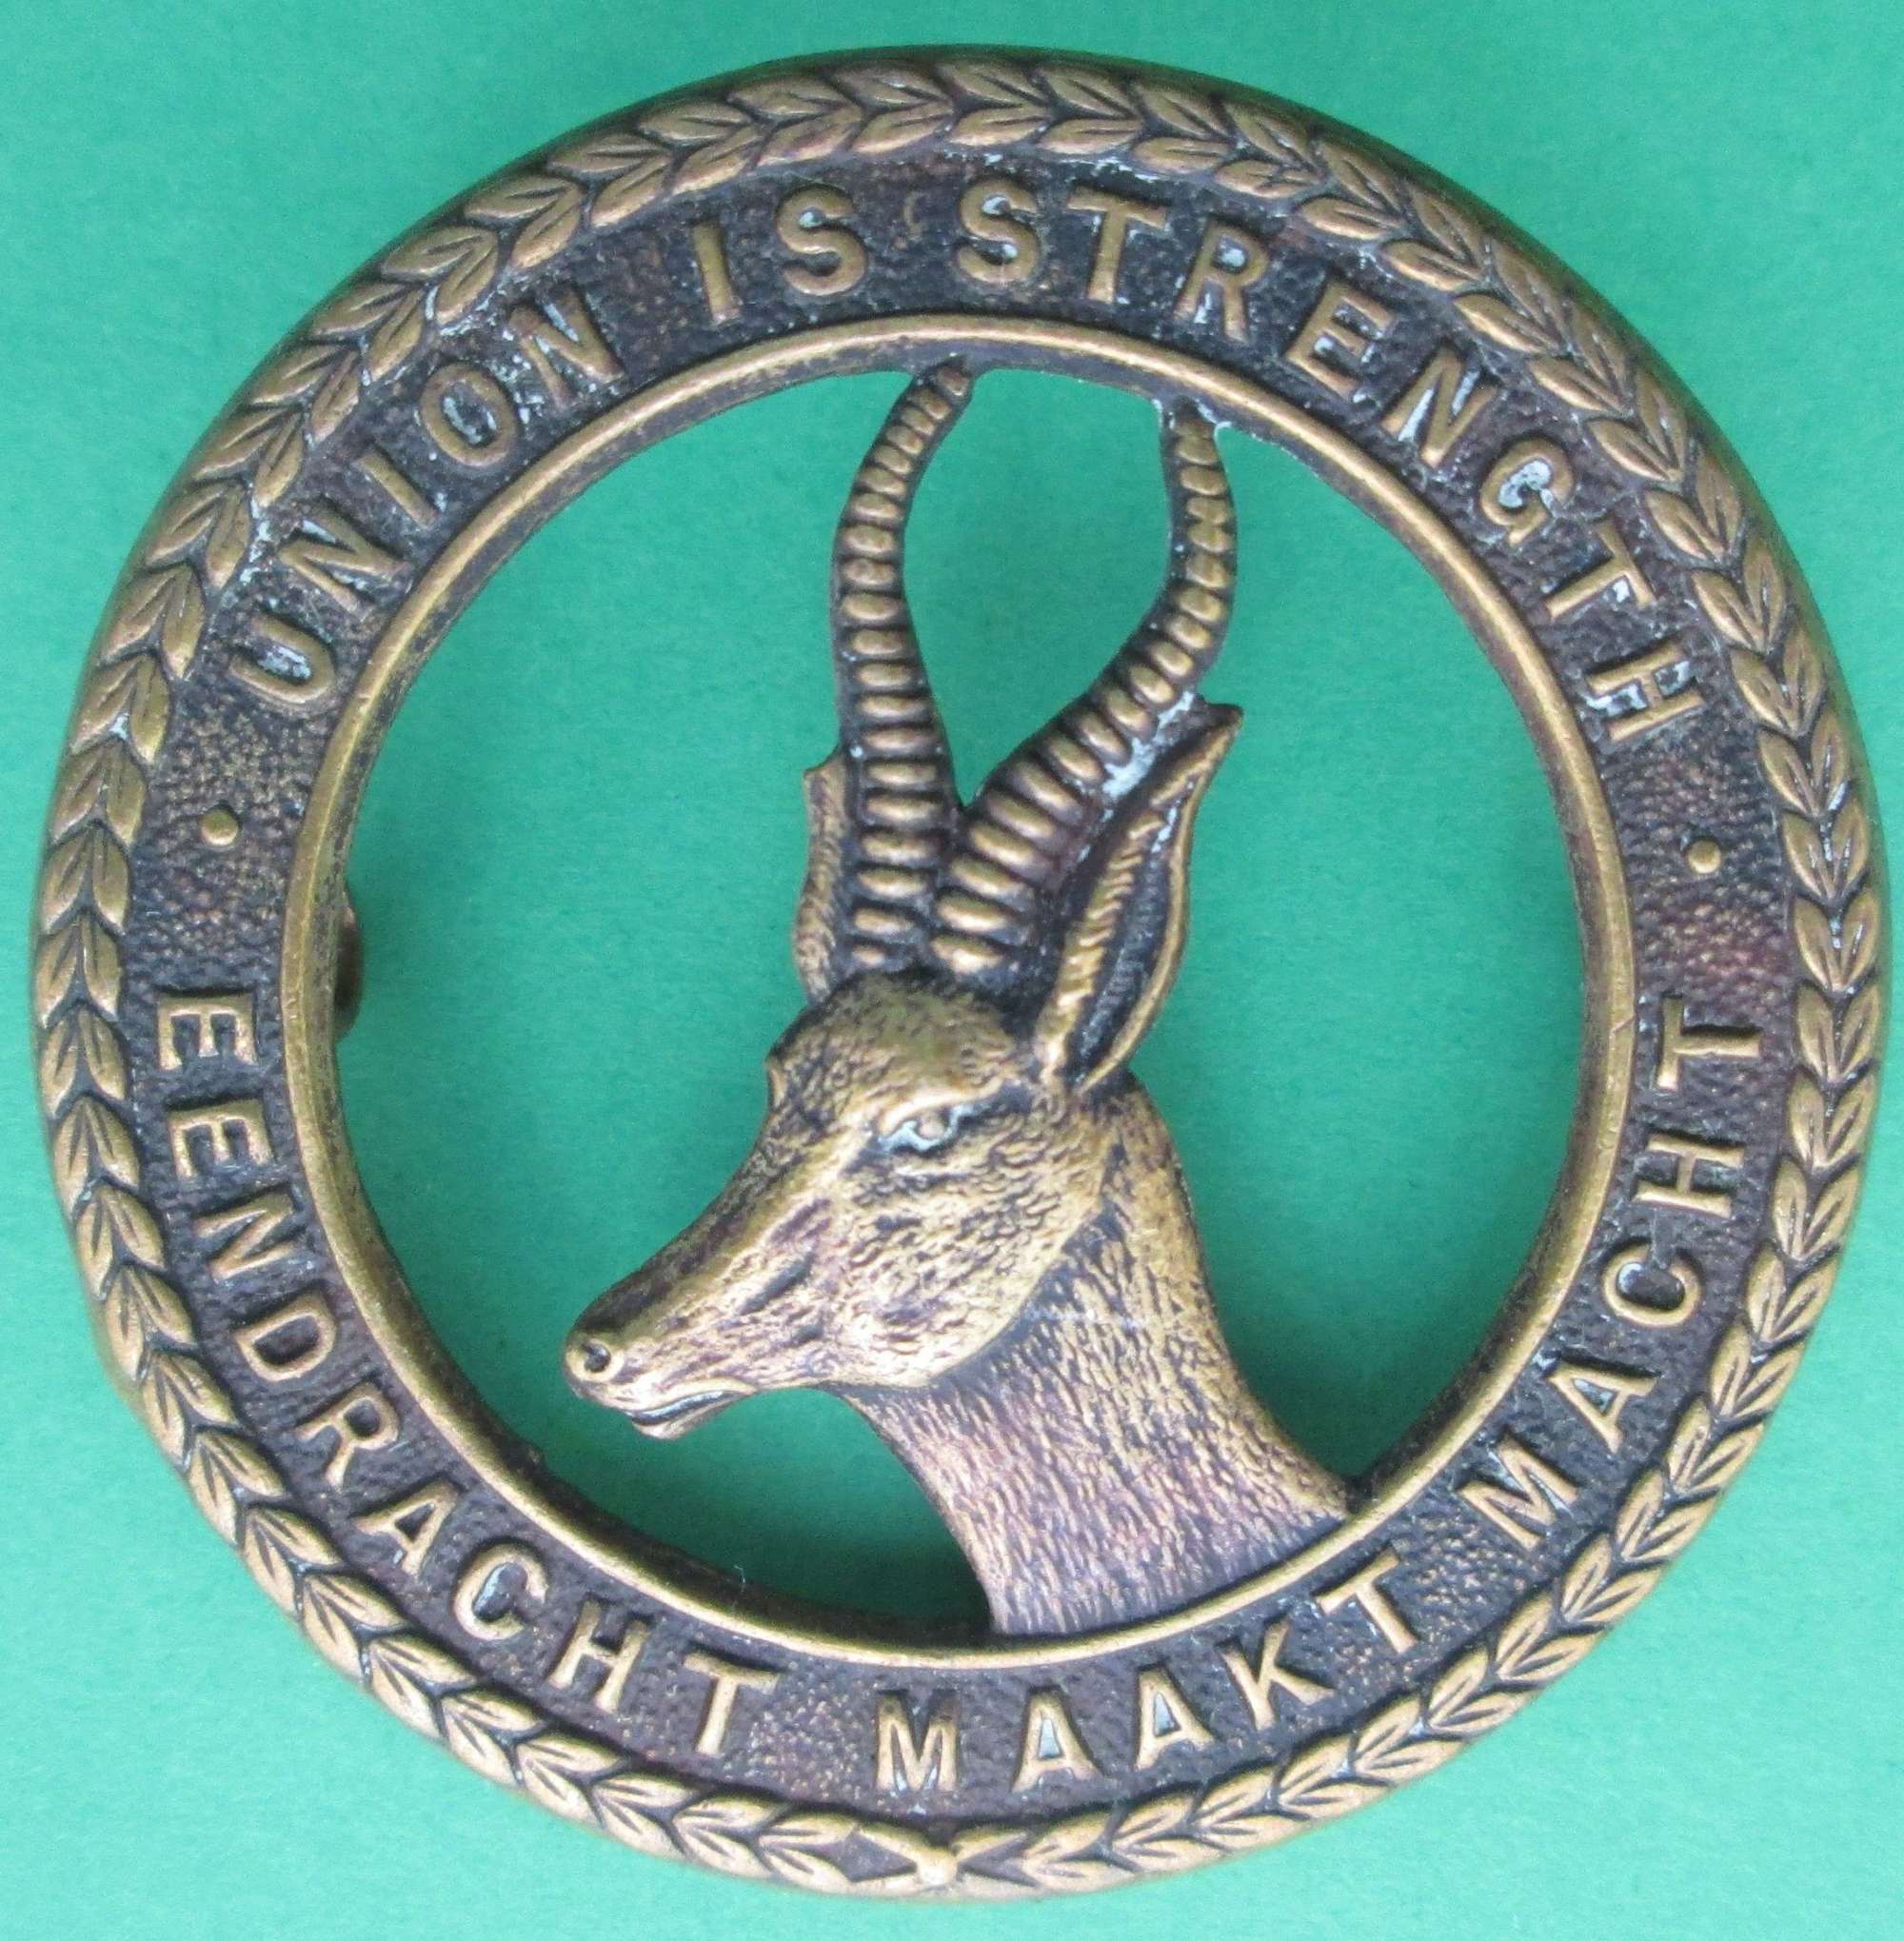 A SOUTH AFRICAN INFANTRY BRIGADE BADGE